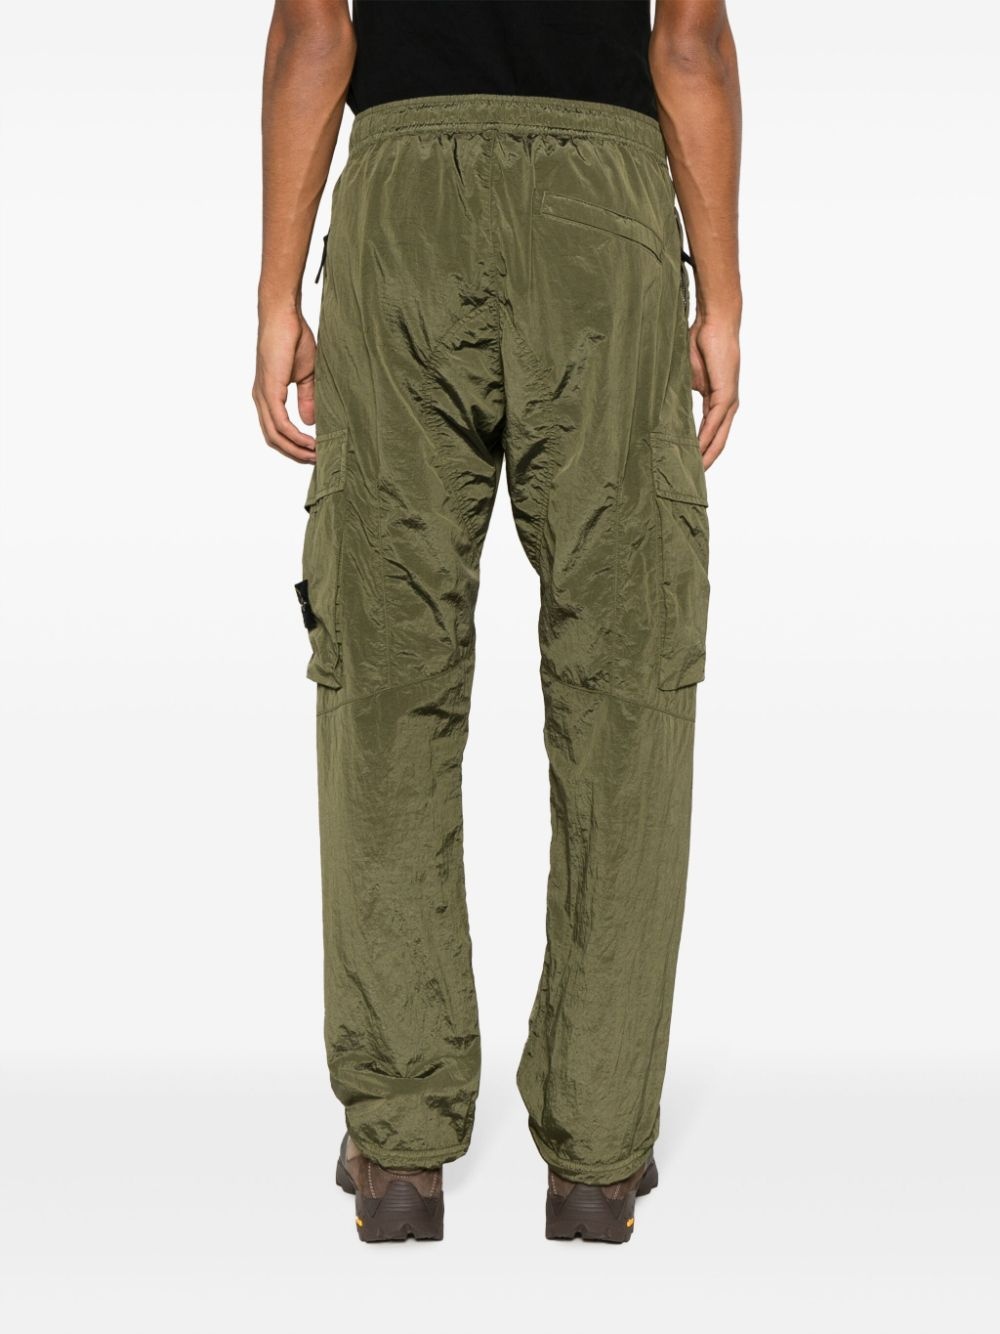 Compass-motif crinkled cargo trousers - 4